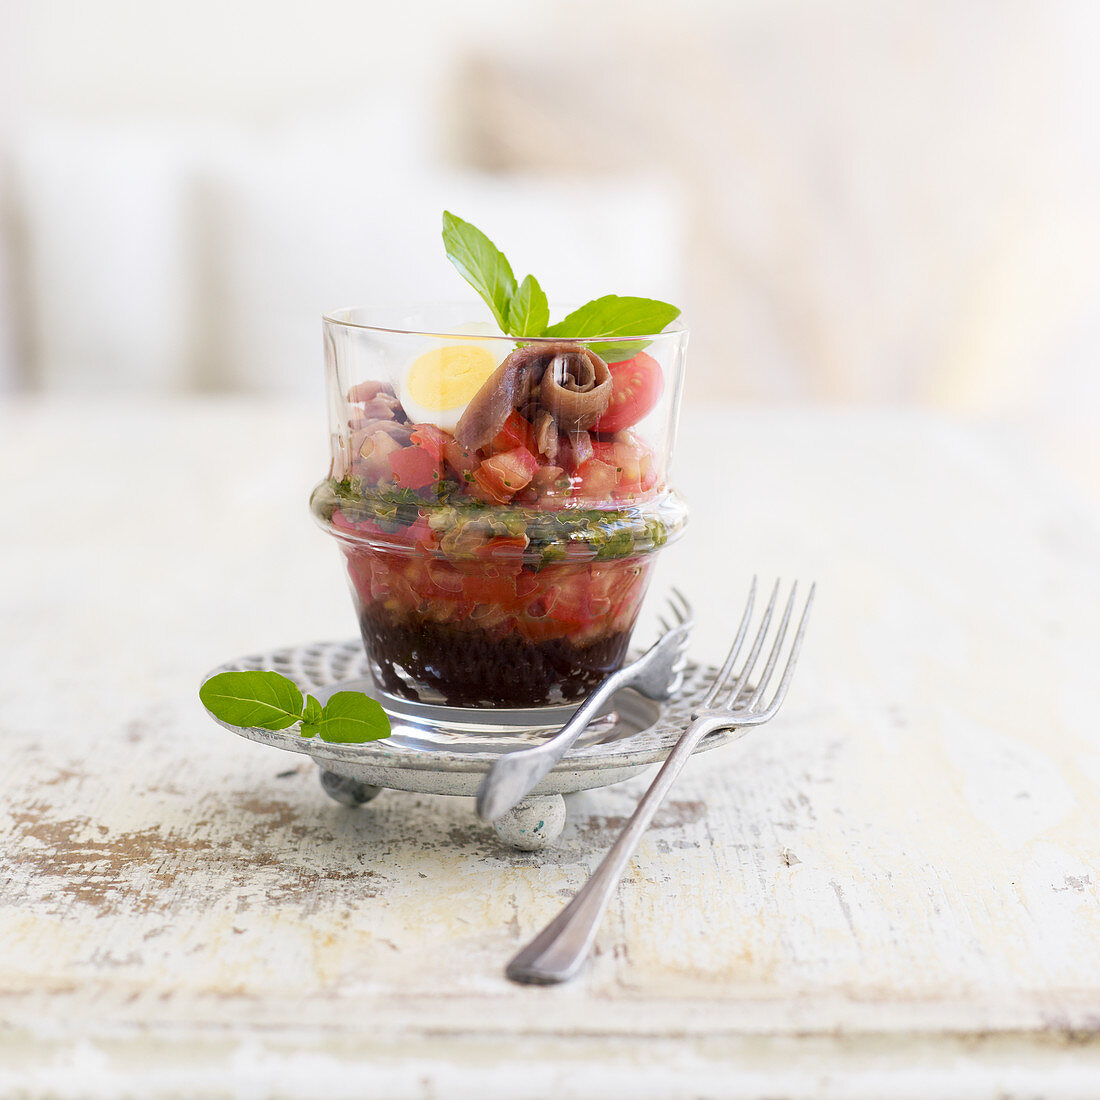 Tomato concassee with anchovies